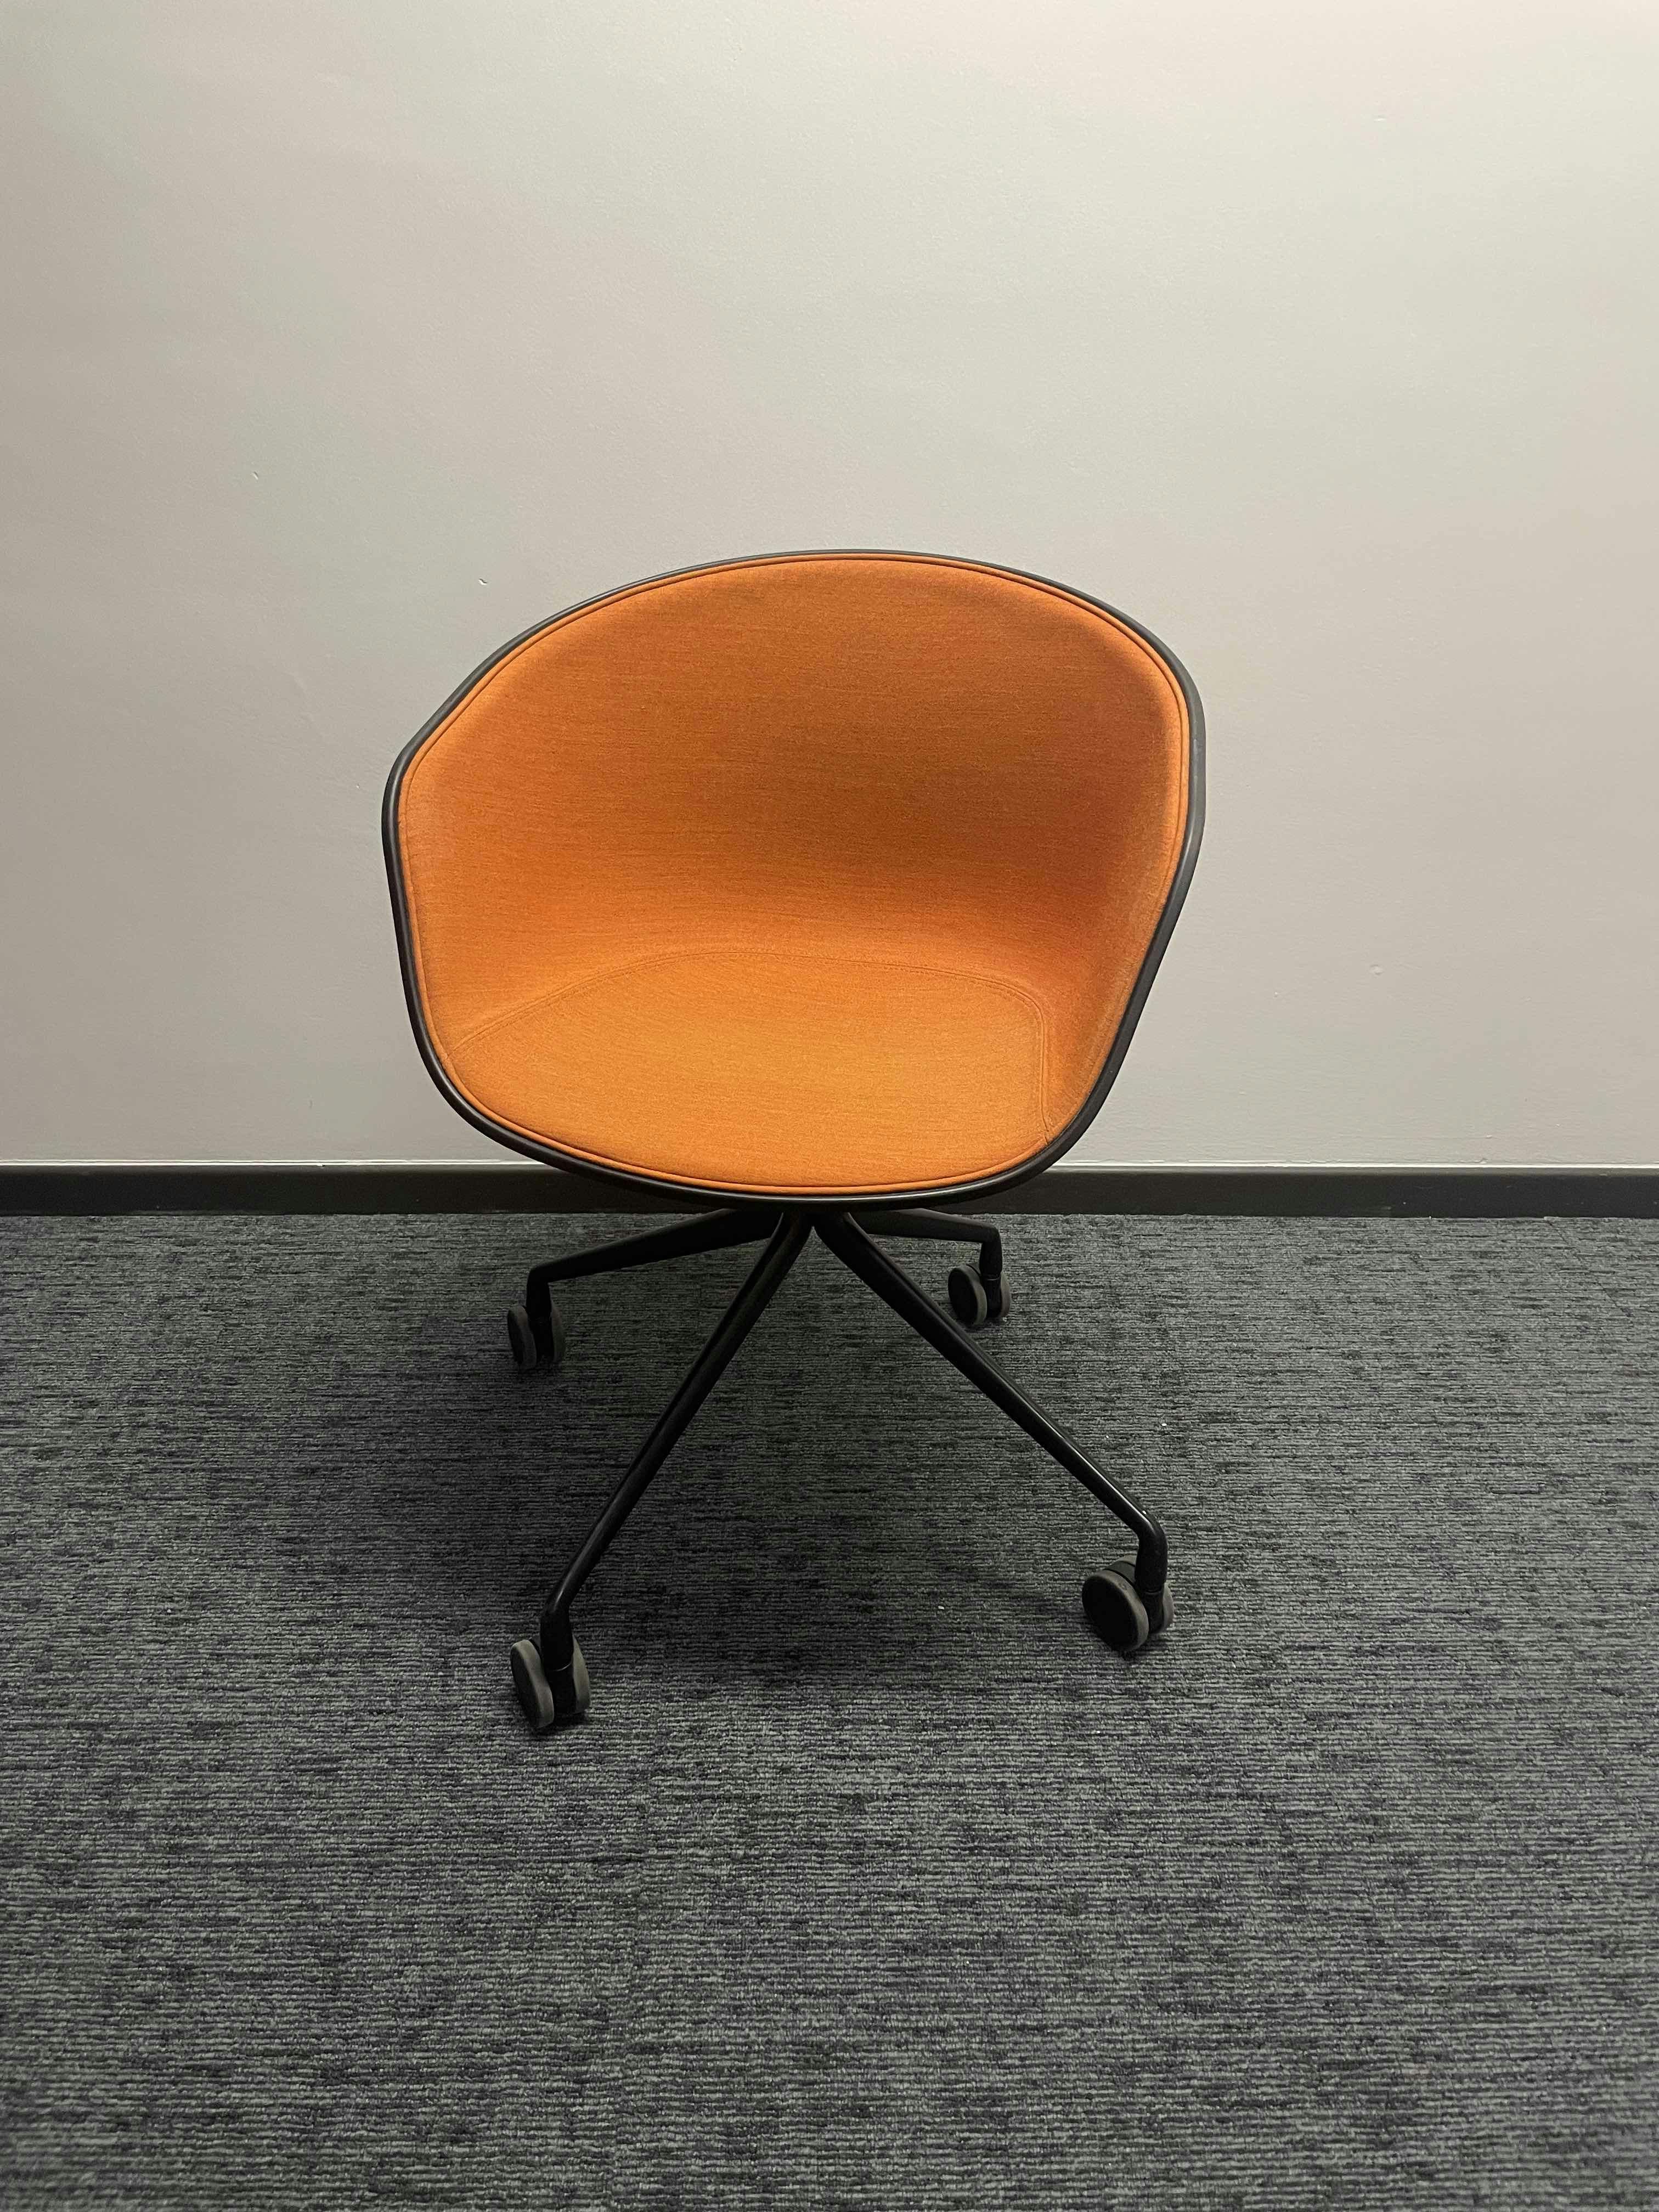 Orange and Black Chair Hay - Second hand quality "Chairs" - Relieve Furniture - 1